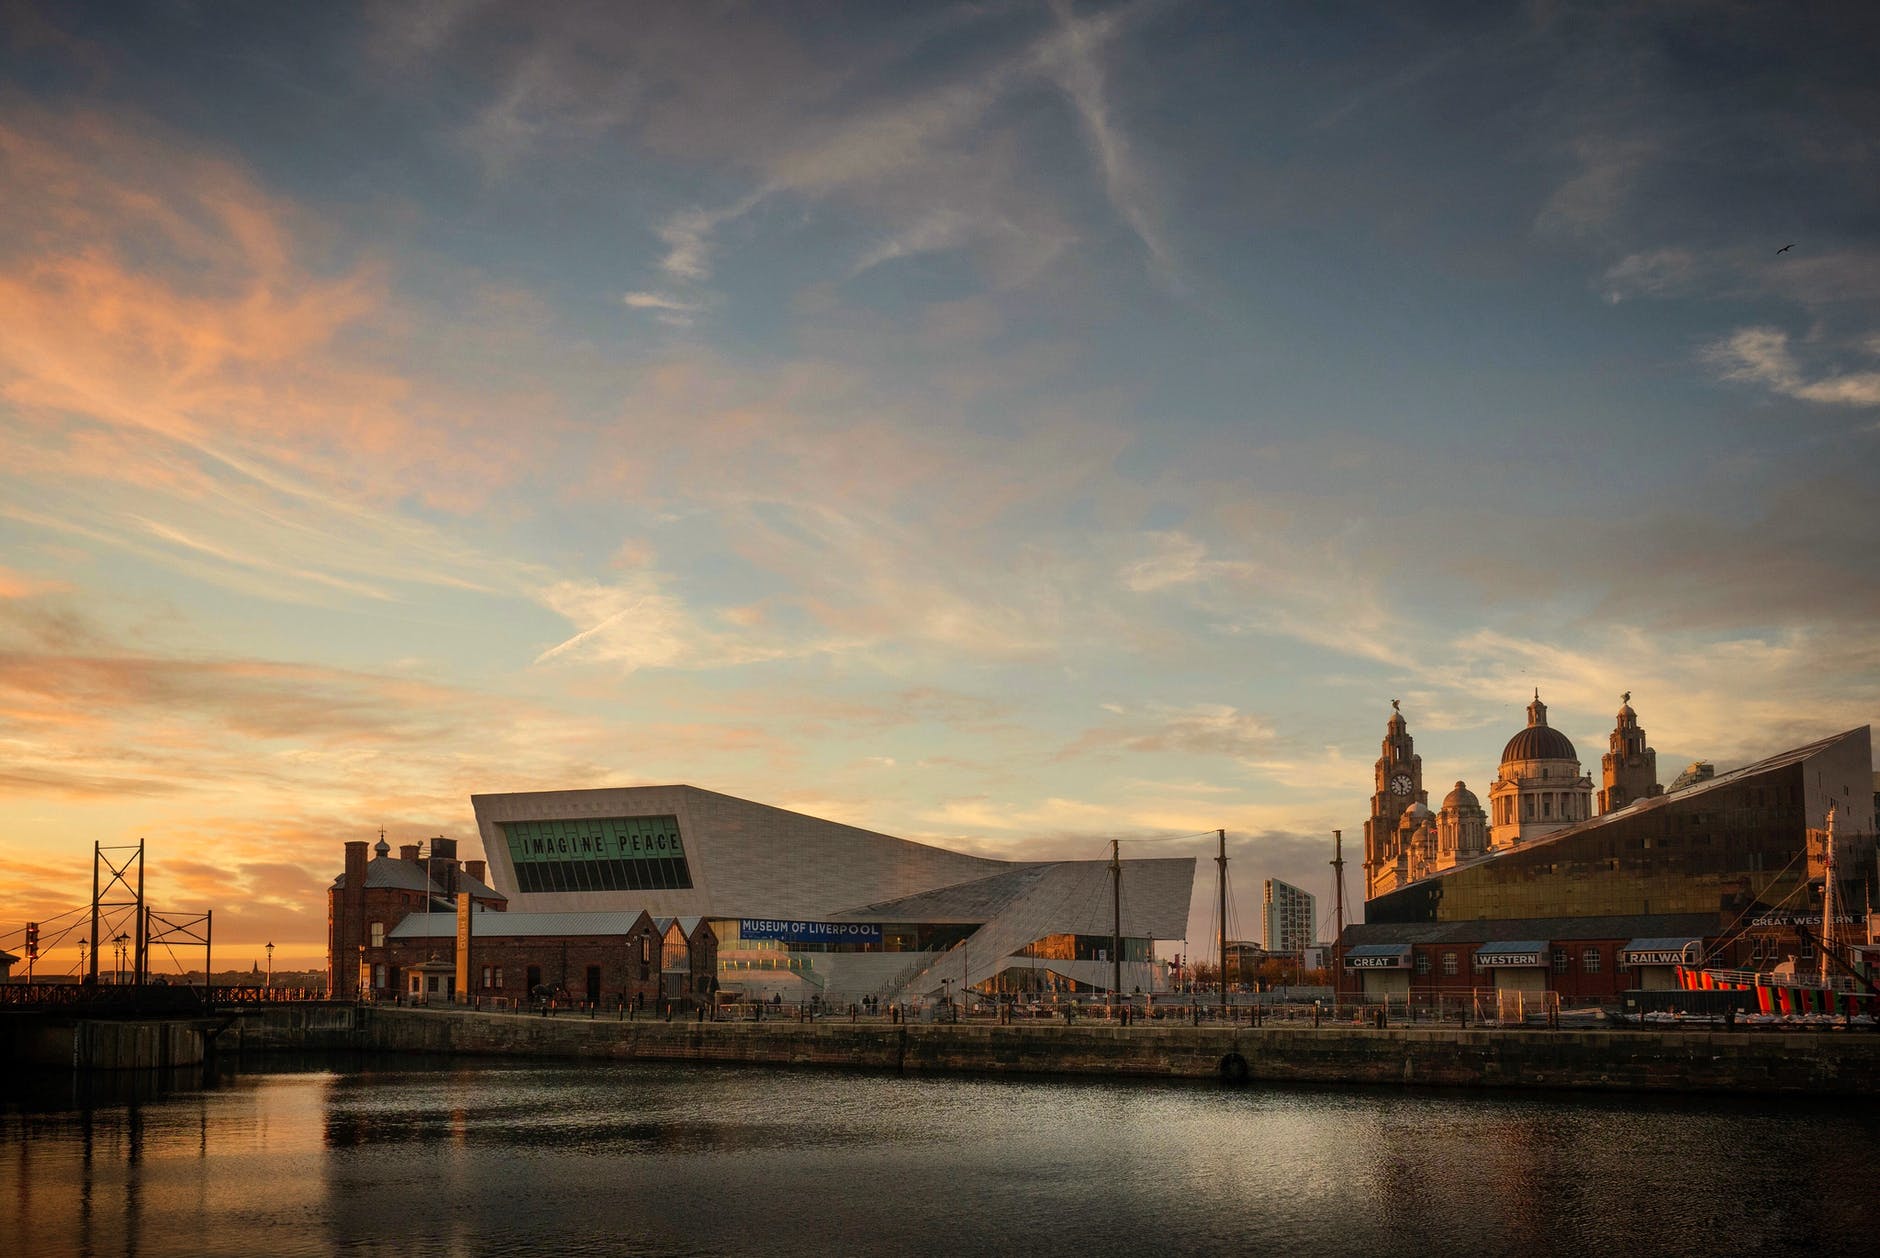 A visit to Liverpool: What to see and do